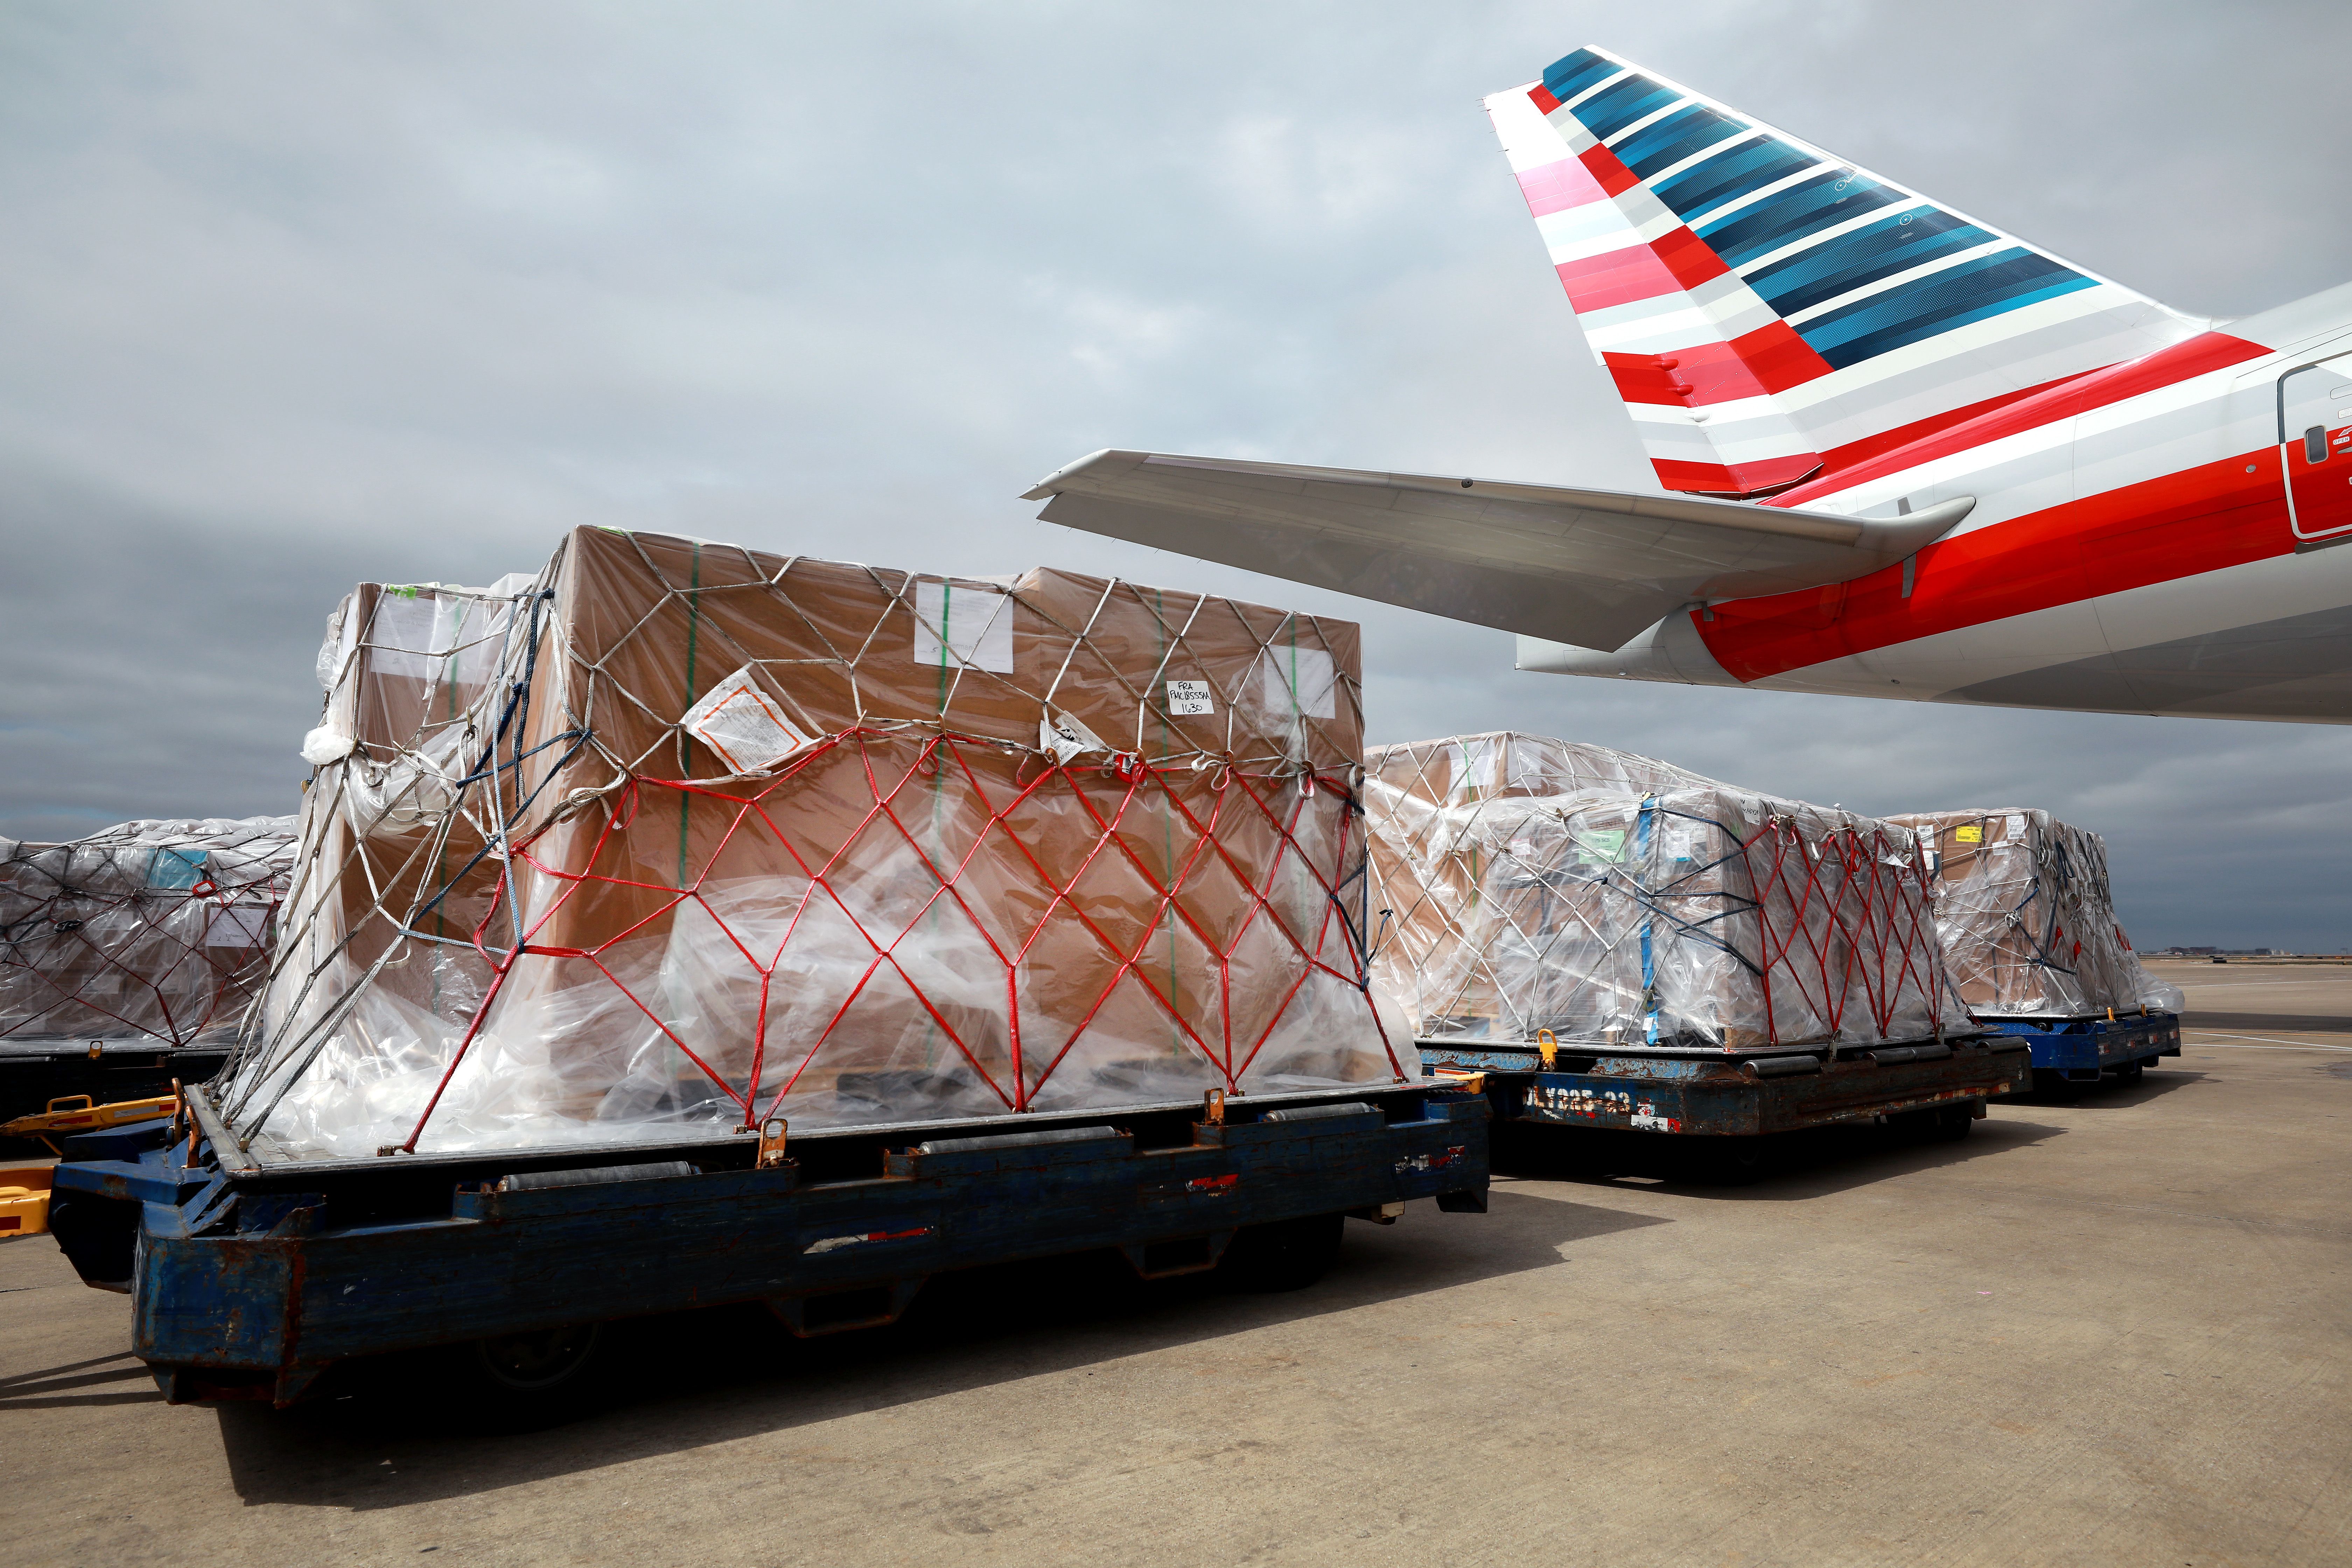 American Airlines cargo being loaded onto plane